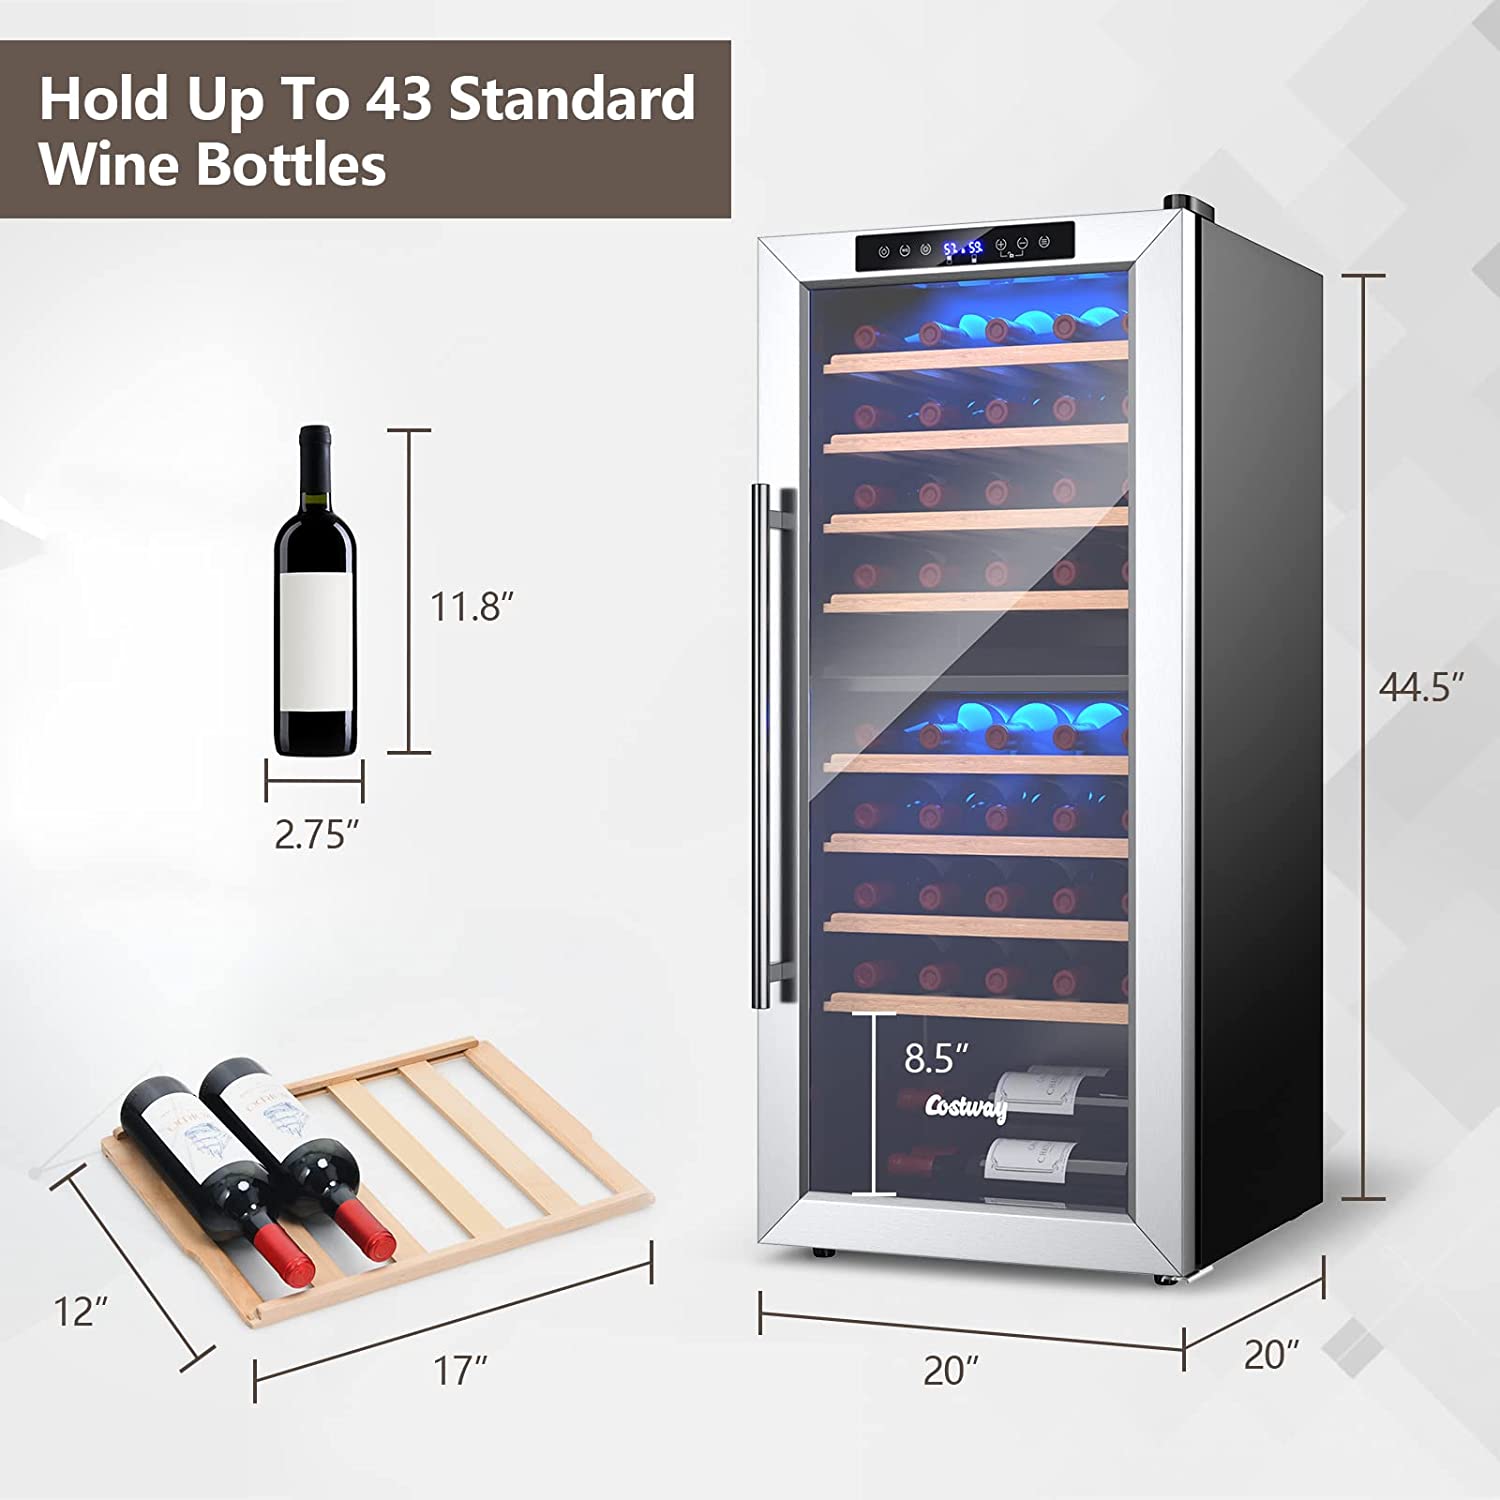 20-Inch Built-In or Freestanding Wine and Beverage Cooler 43-Bottle Dual Zone Wine Refrigerator with 8 Wooden Shelves